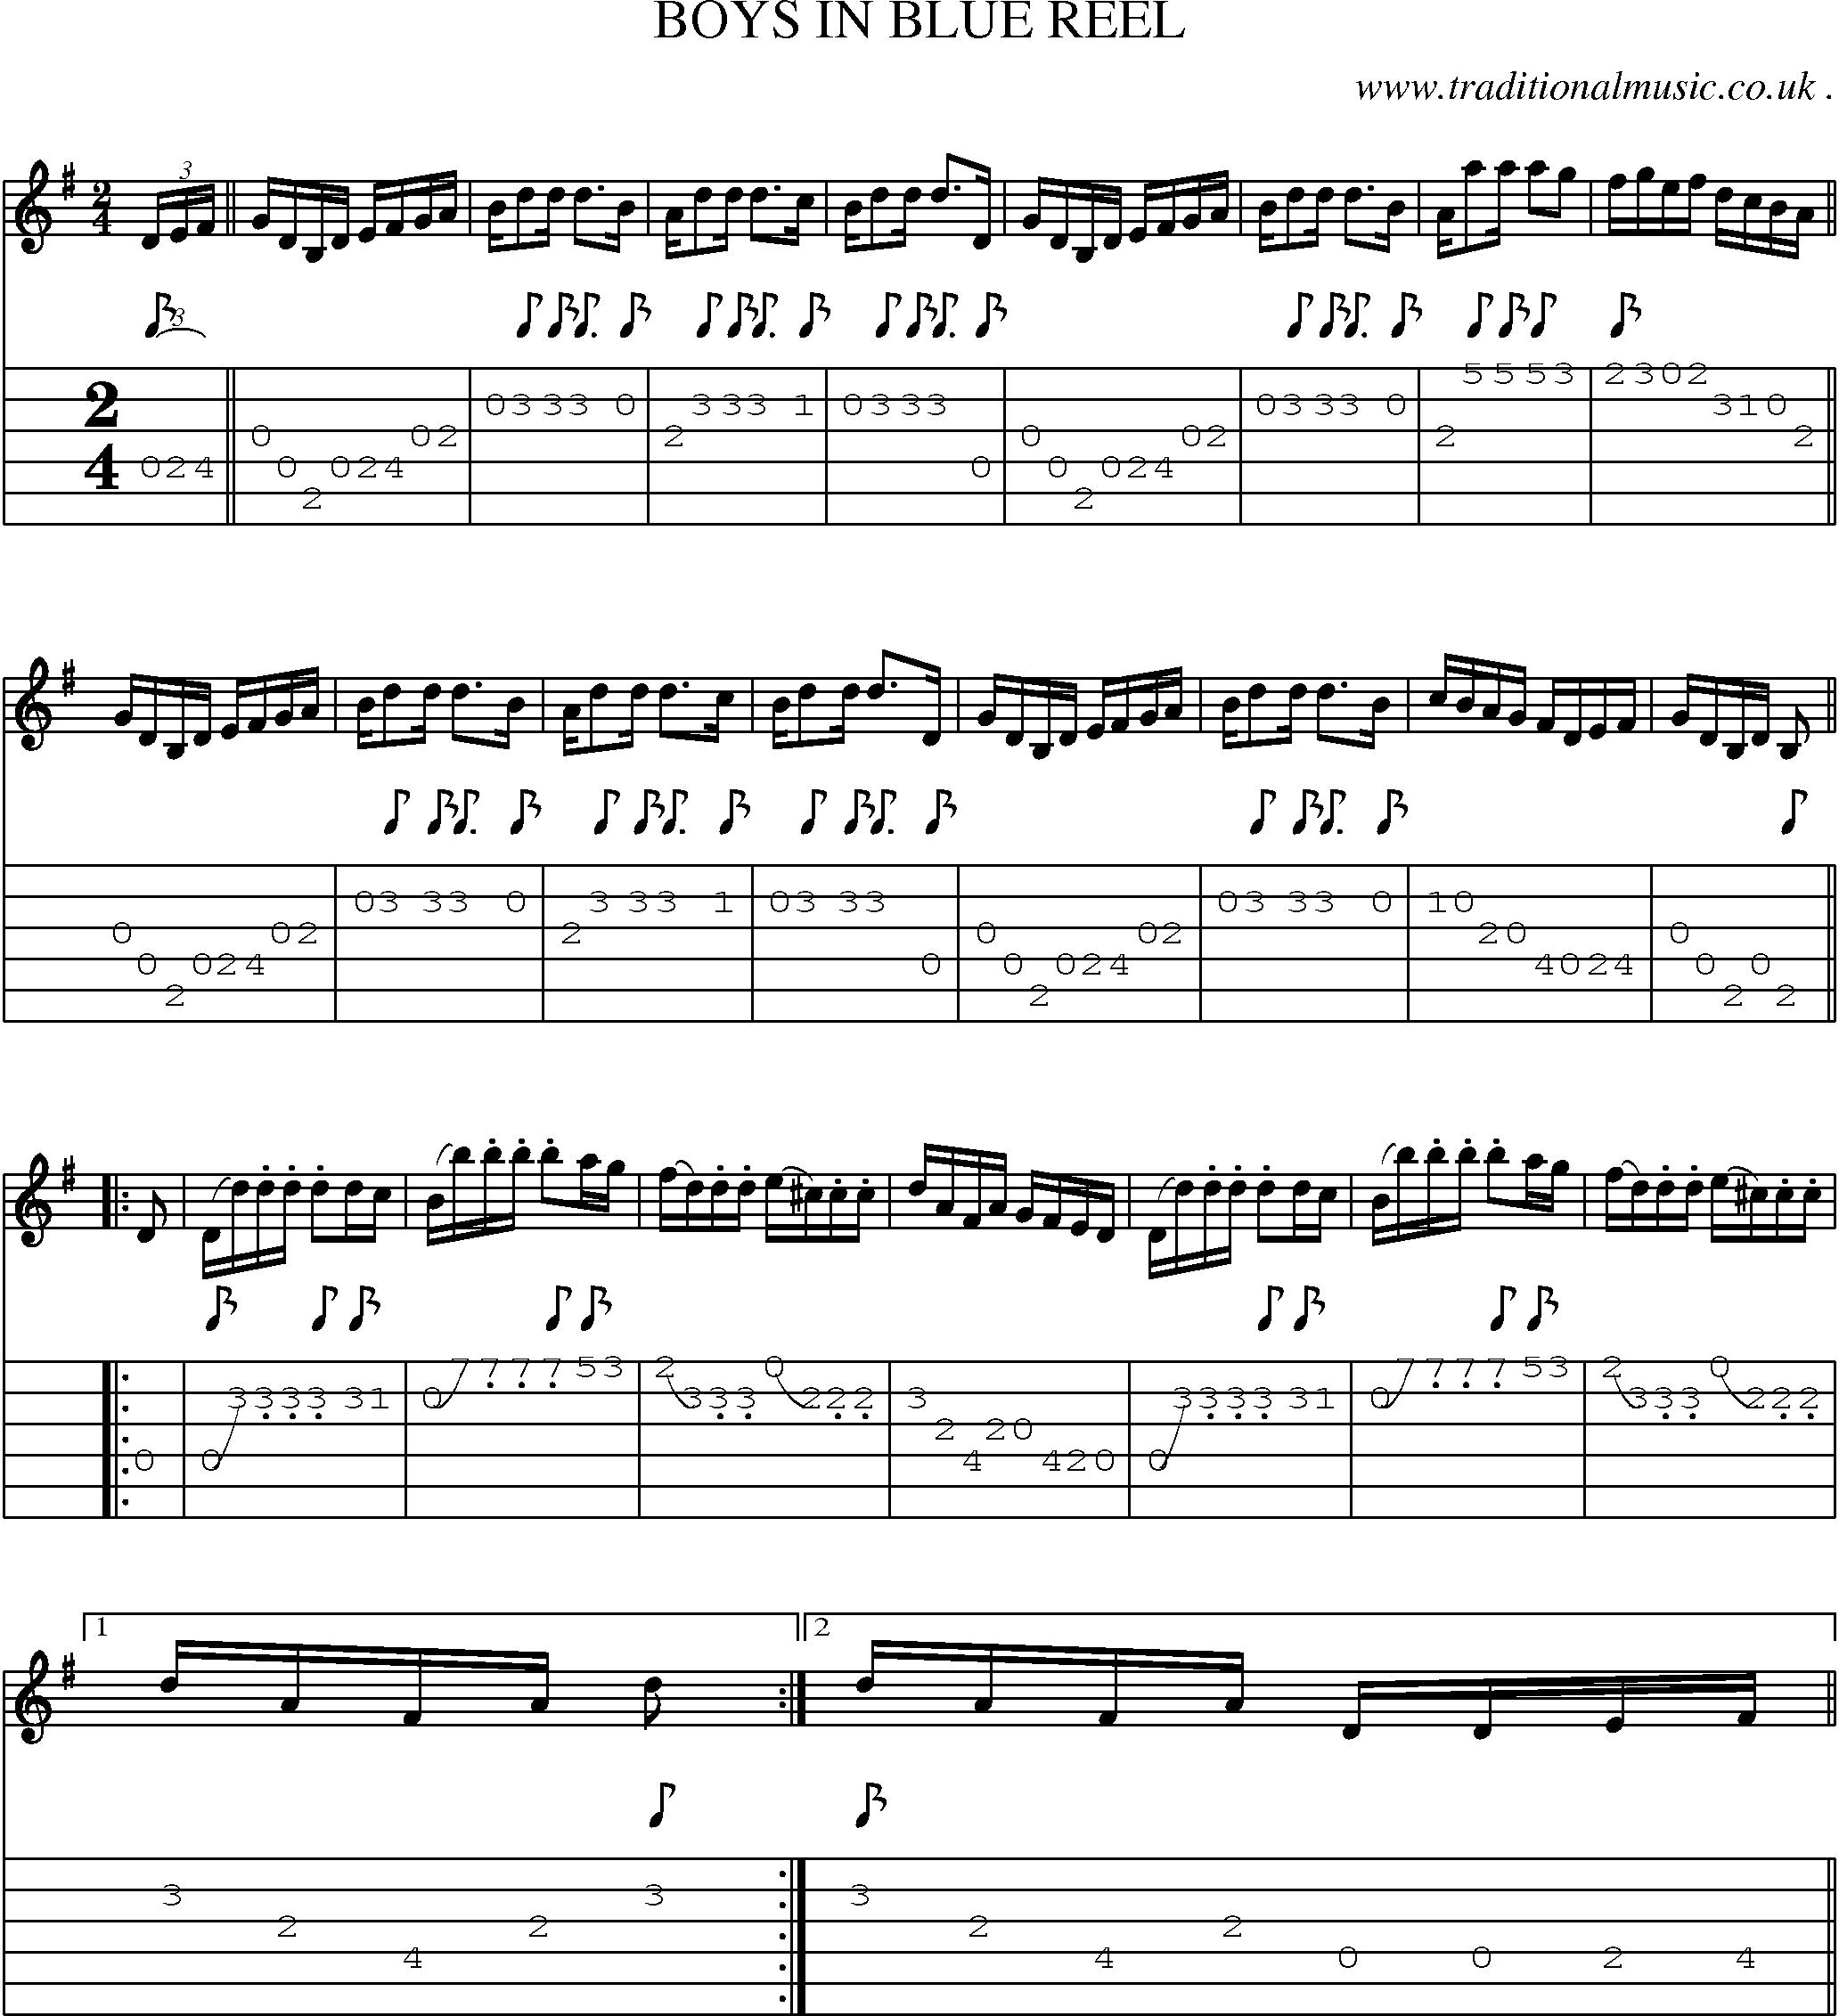 Sheet-Music and Guitar Tabs for Boys In Blue Reel